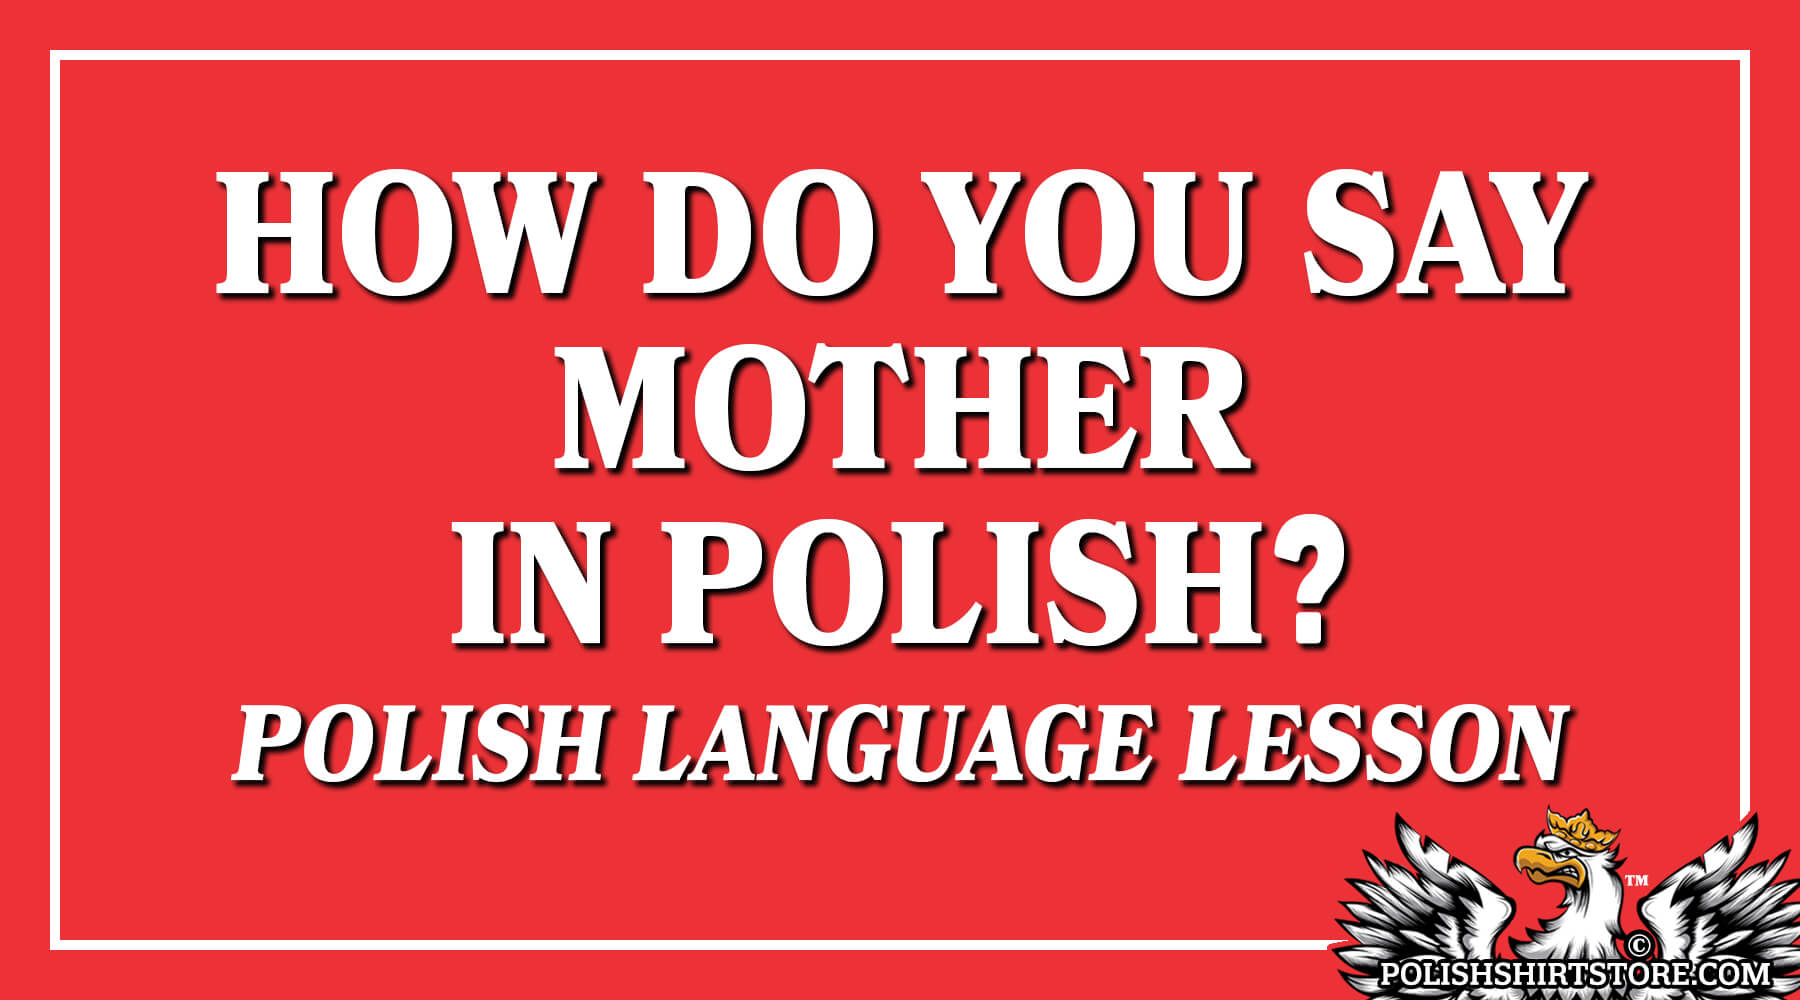 How Do You Say Mother In The Polish Language?